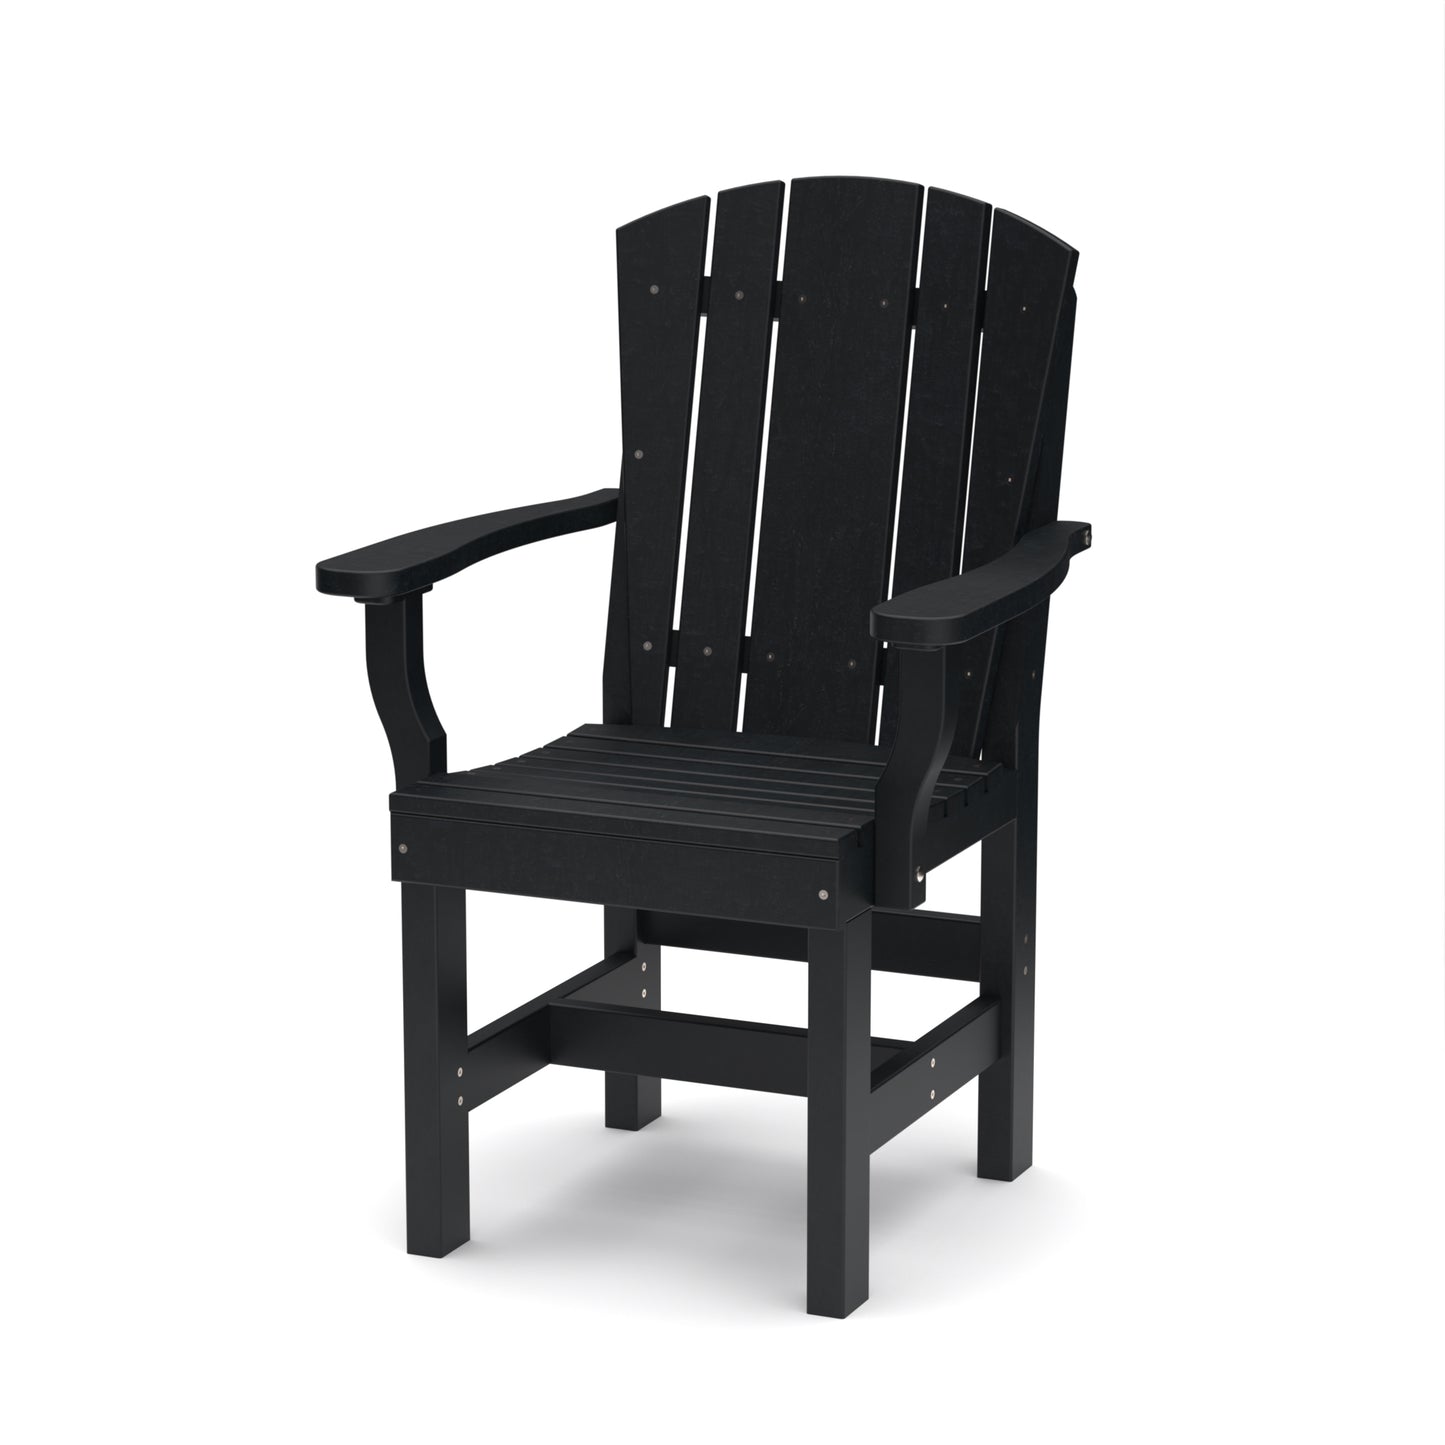 Wildridge Recycled Plastic Heritage Outdoor Dining Chair with Arms - LEAD TIME TO SHIP 6 WEEKS OR LESS